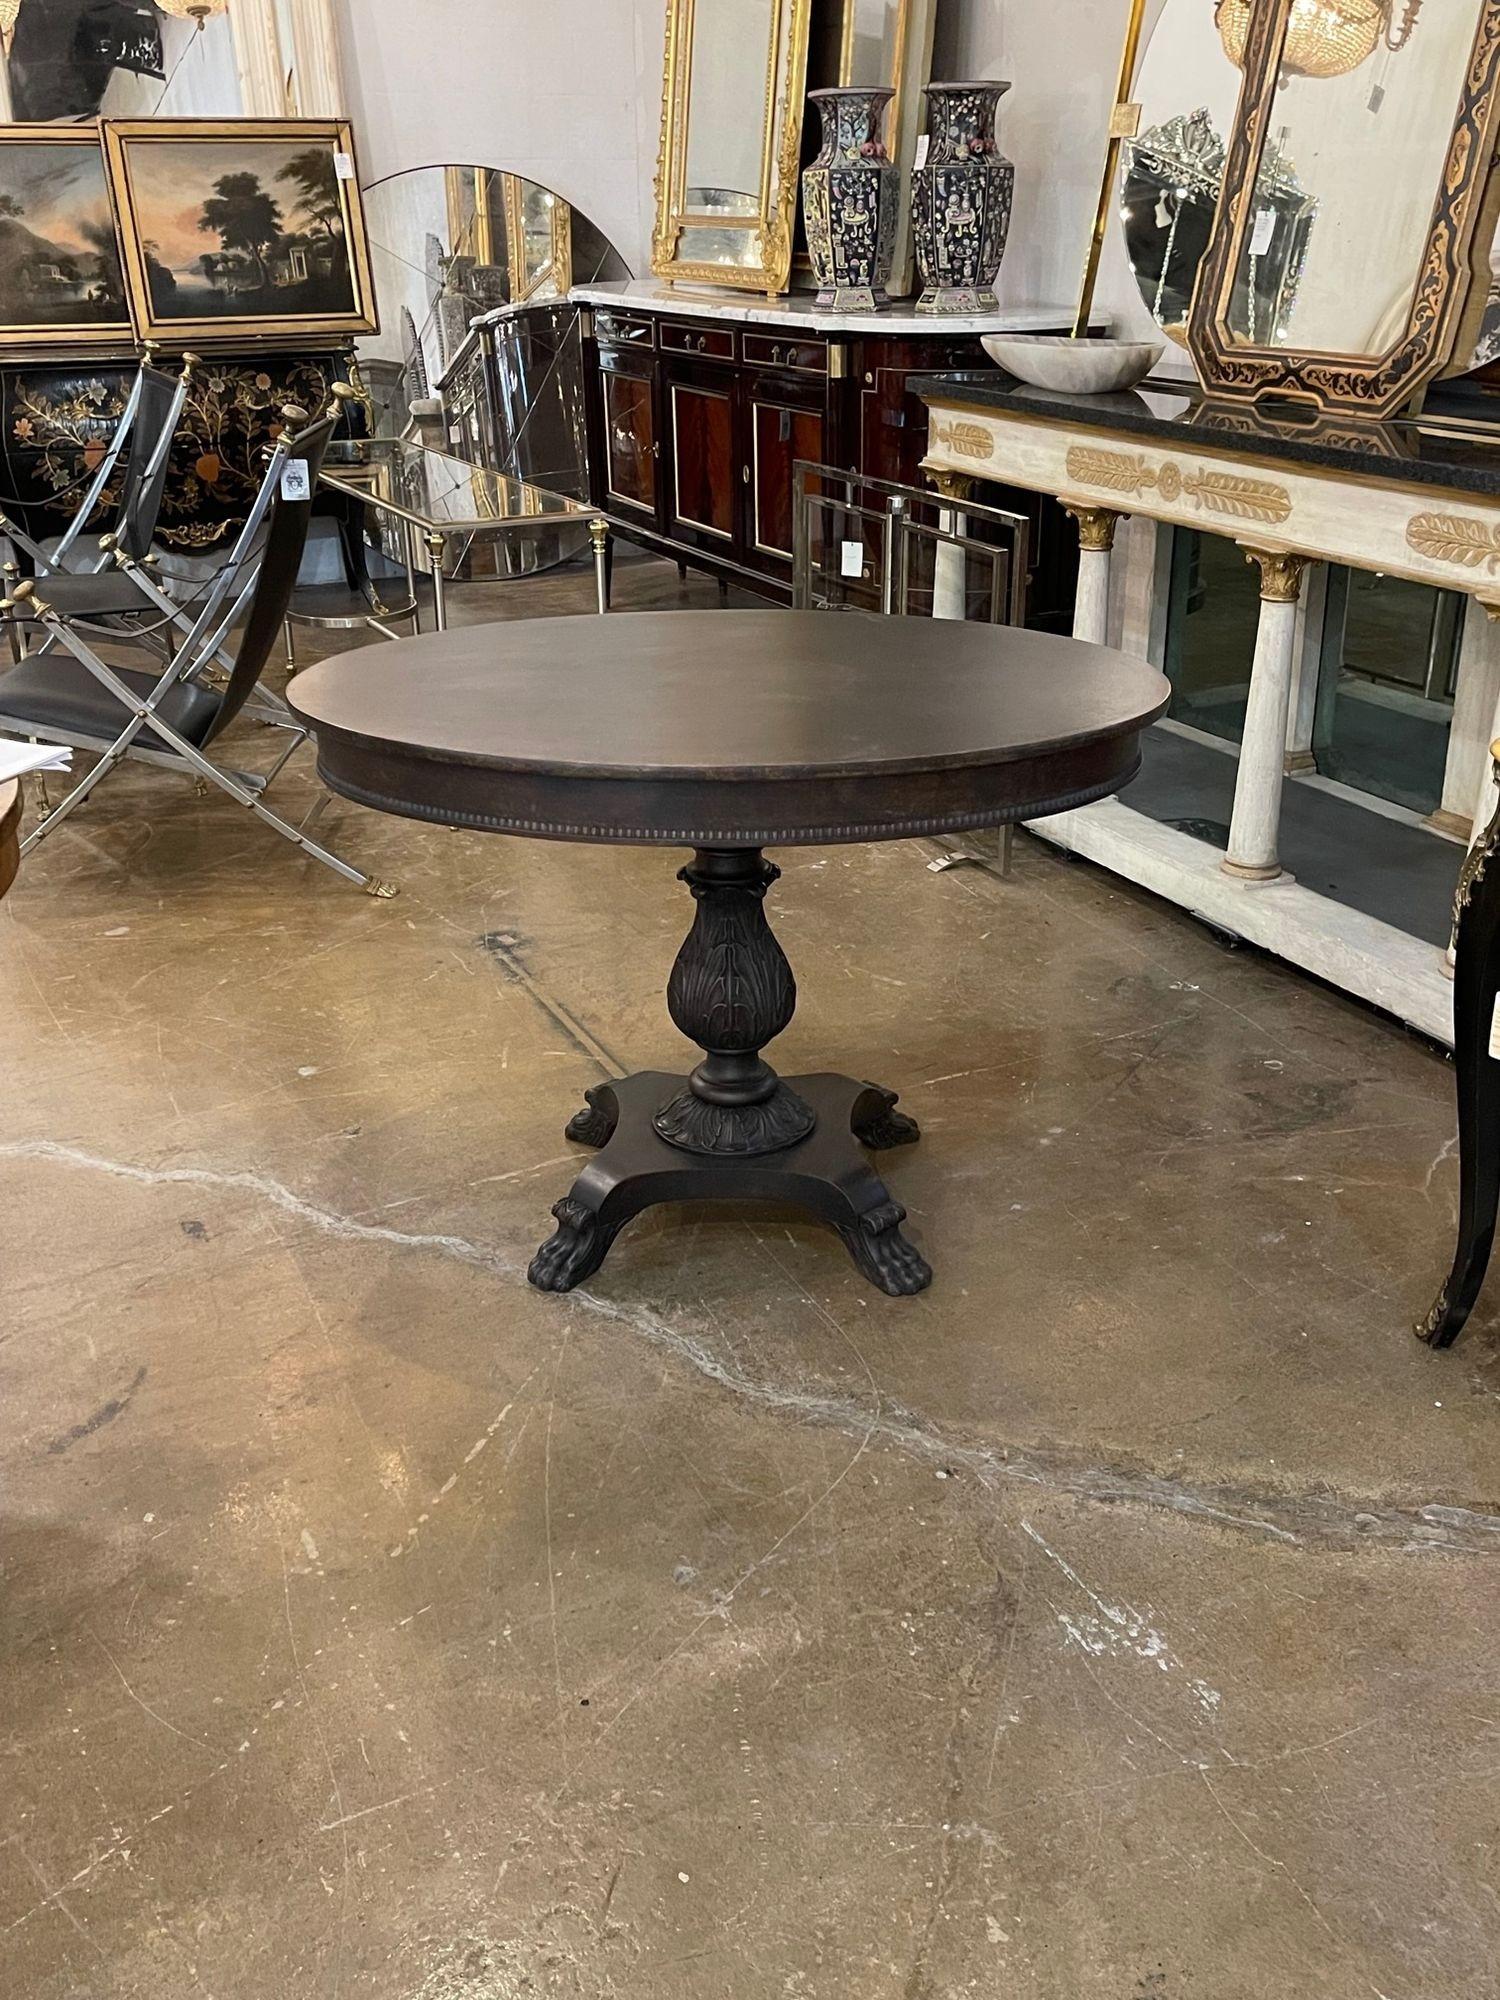 Very fine 19th century Gustavian carved occasional table. Featuring a beautifully carved base and claw feet. Makes an elegant statement!